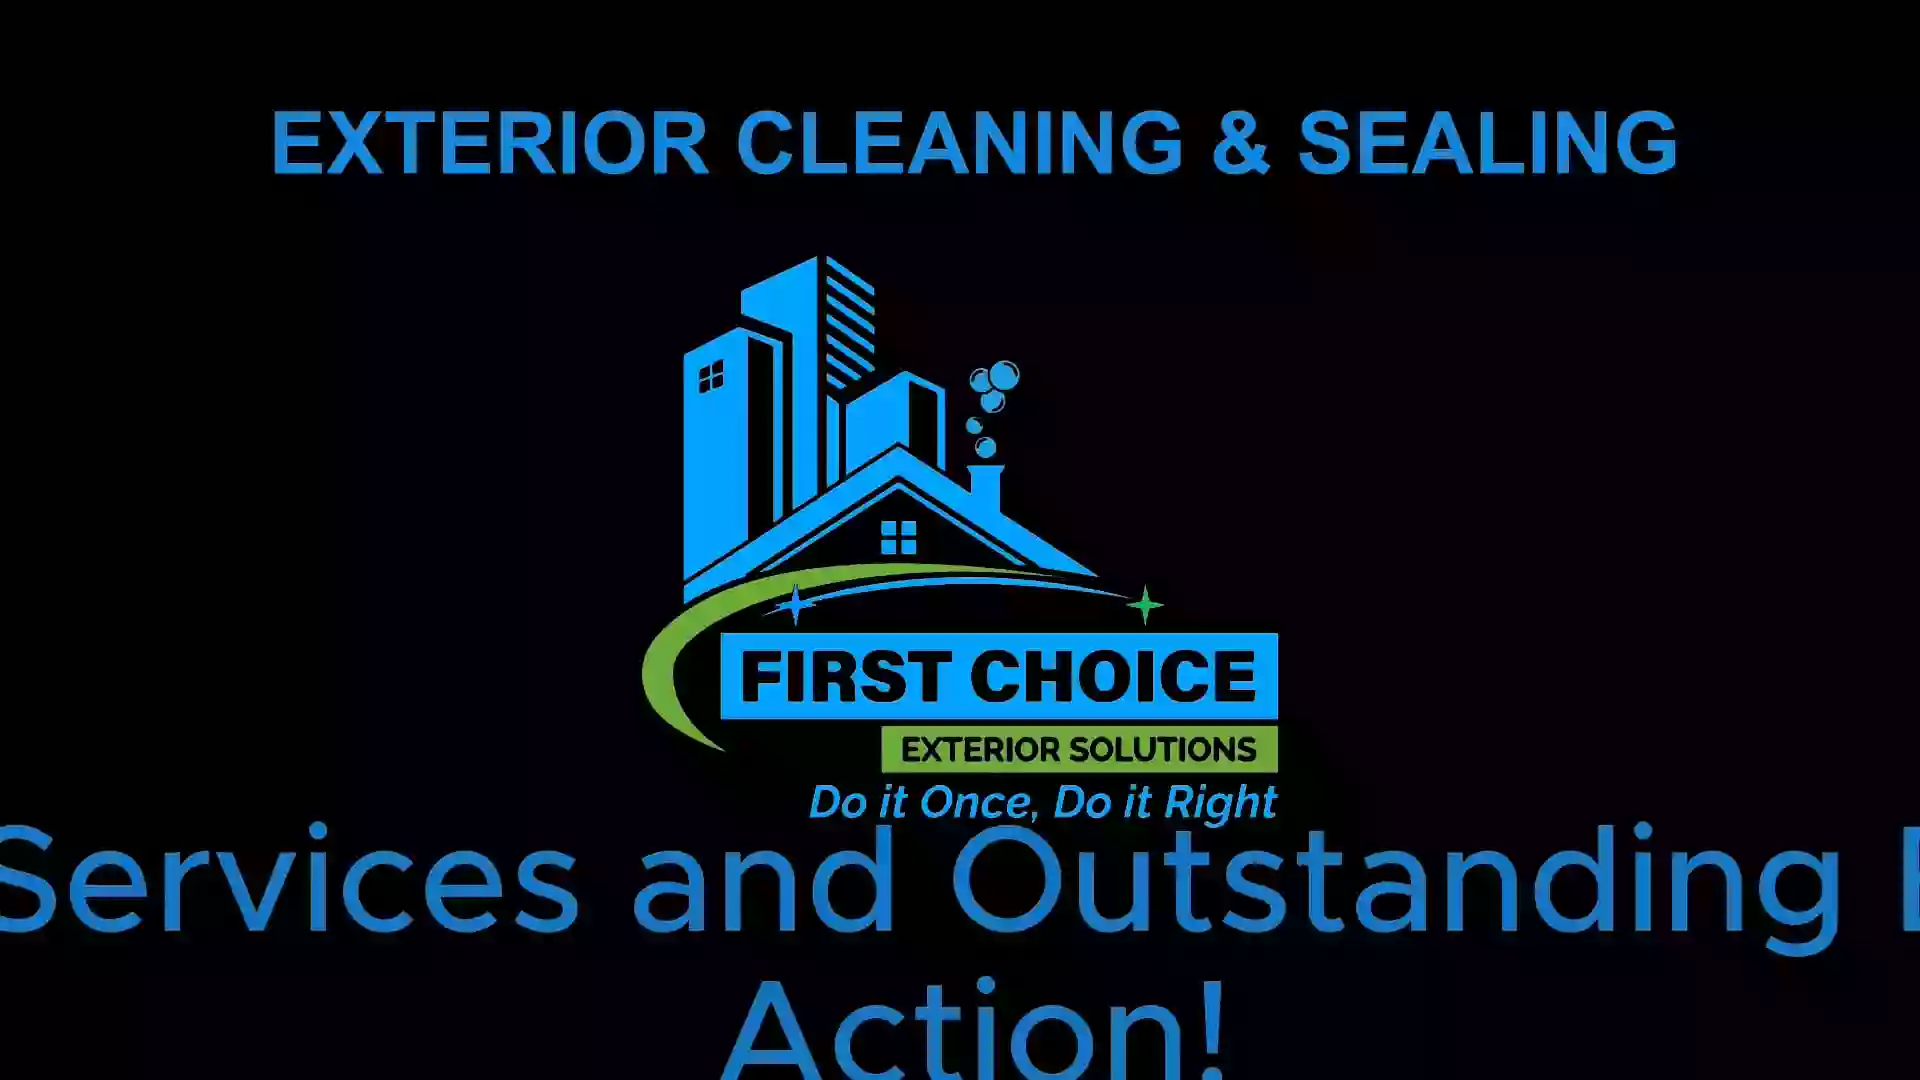 First Choice Exterior Solutions